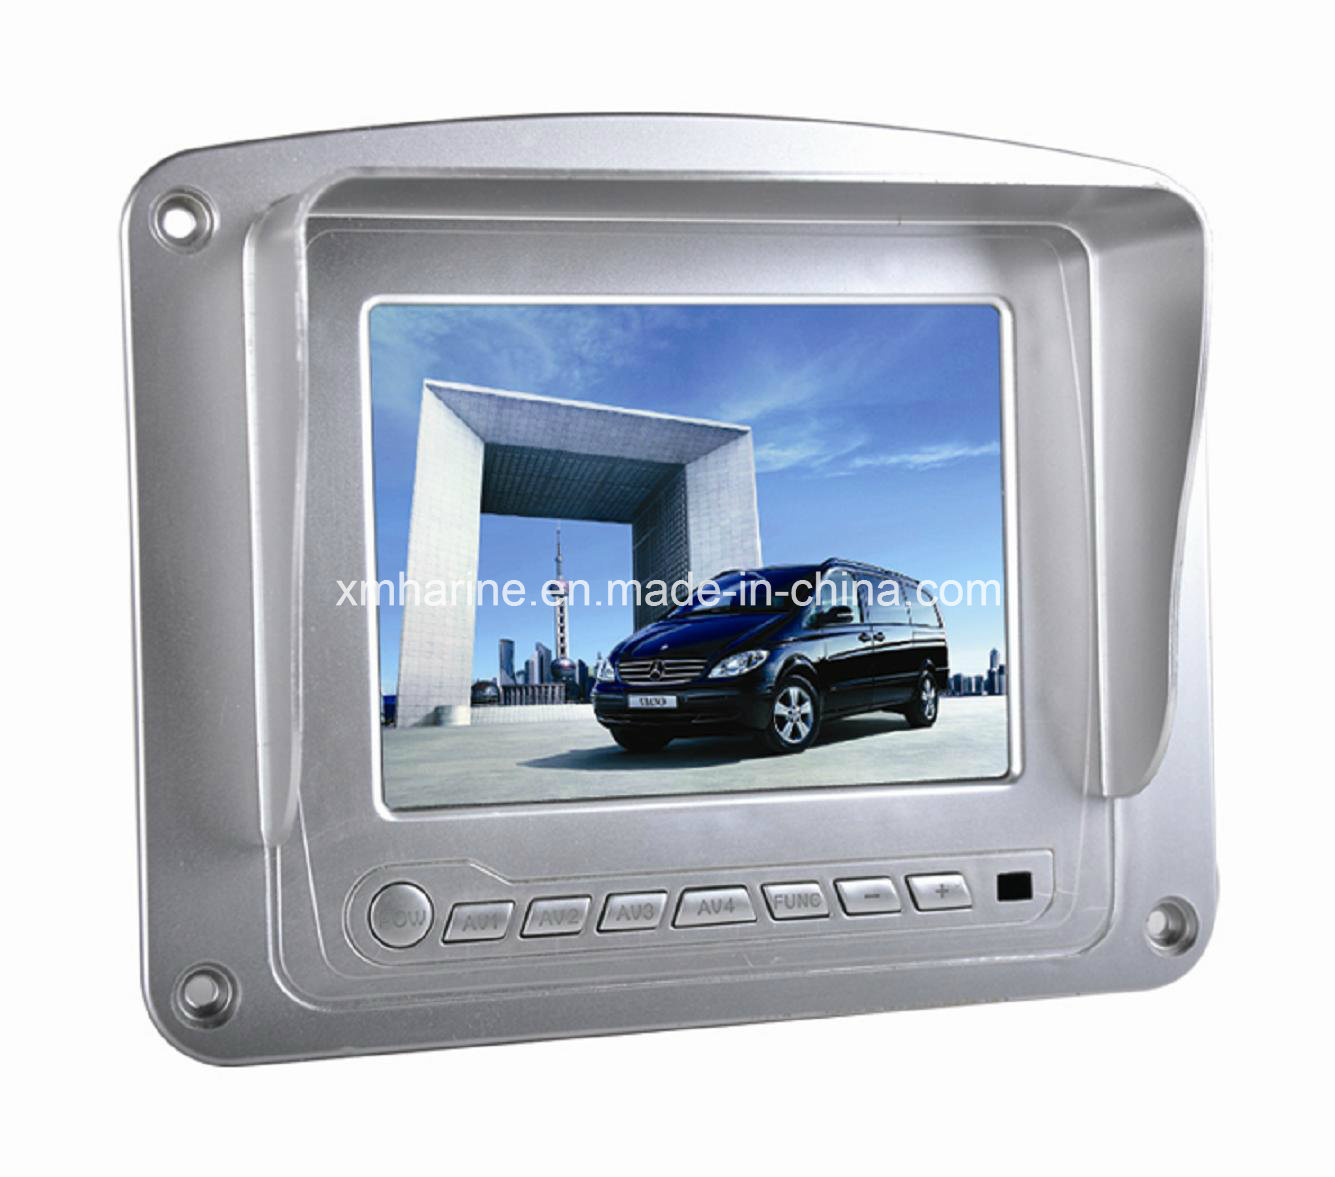 5.6 Inches Rear View Automatic Car Parking System